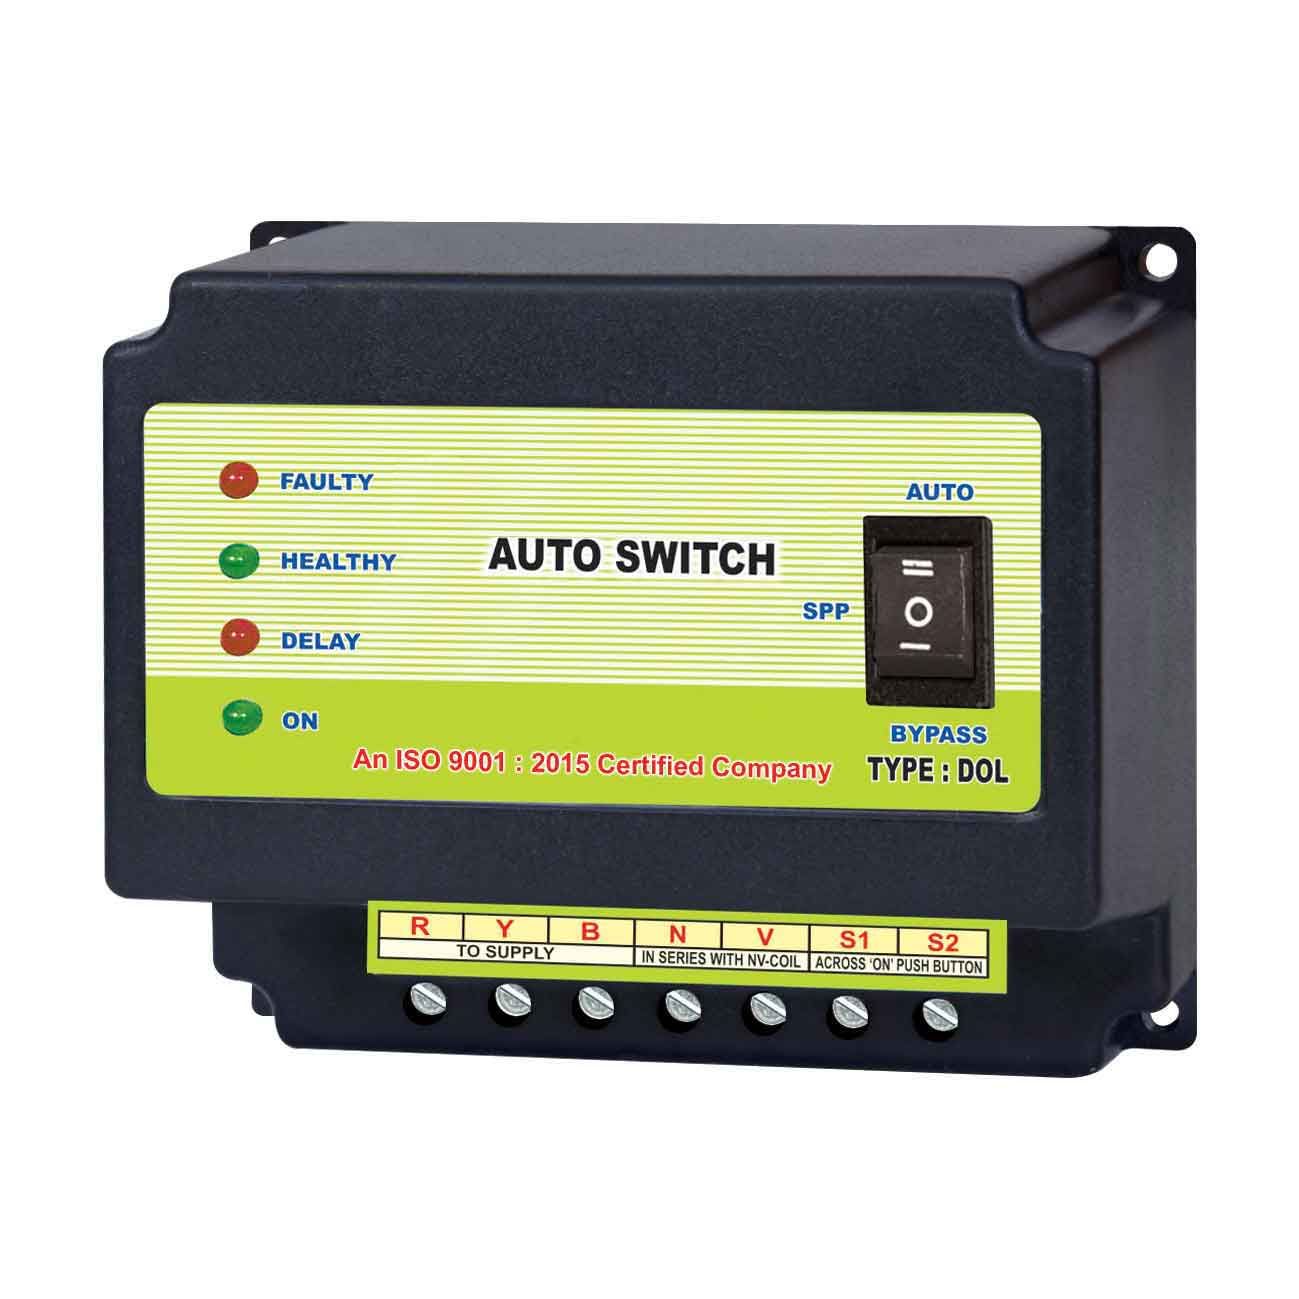 Auto Switch for 3 Phase Motor with spp and on time delay auto start when fault resolved